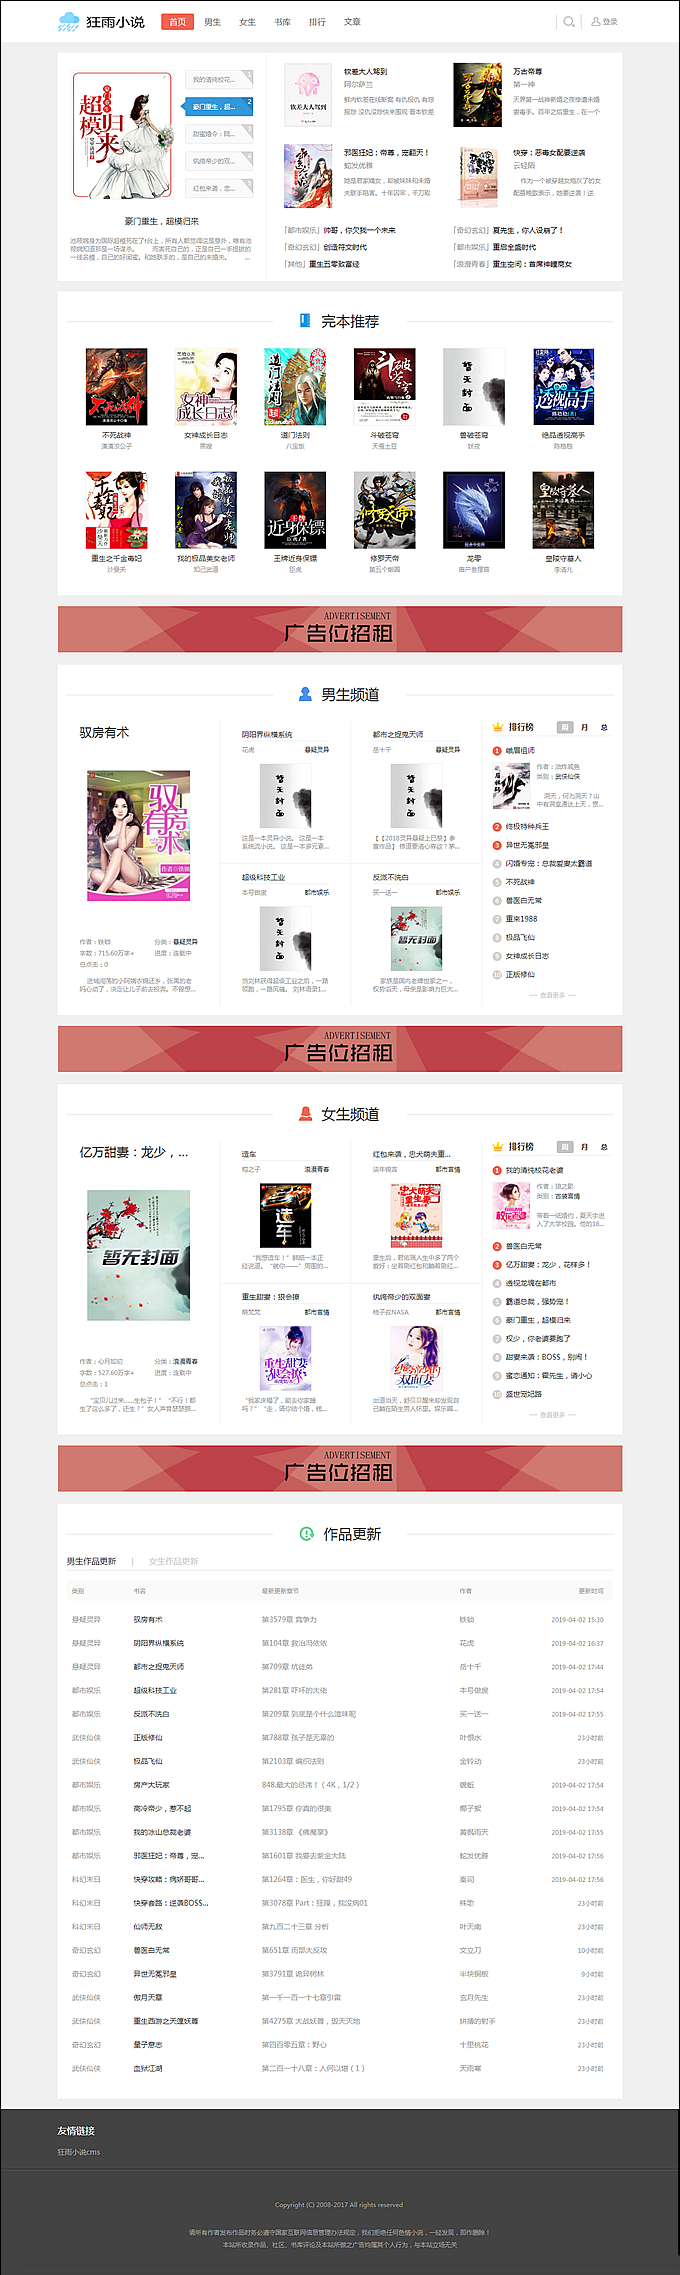 PHP novel CMS full plug-in system_listening to books + Baidu push + paid white pc mobile phone template + 3 collection rules + single collection